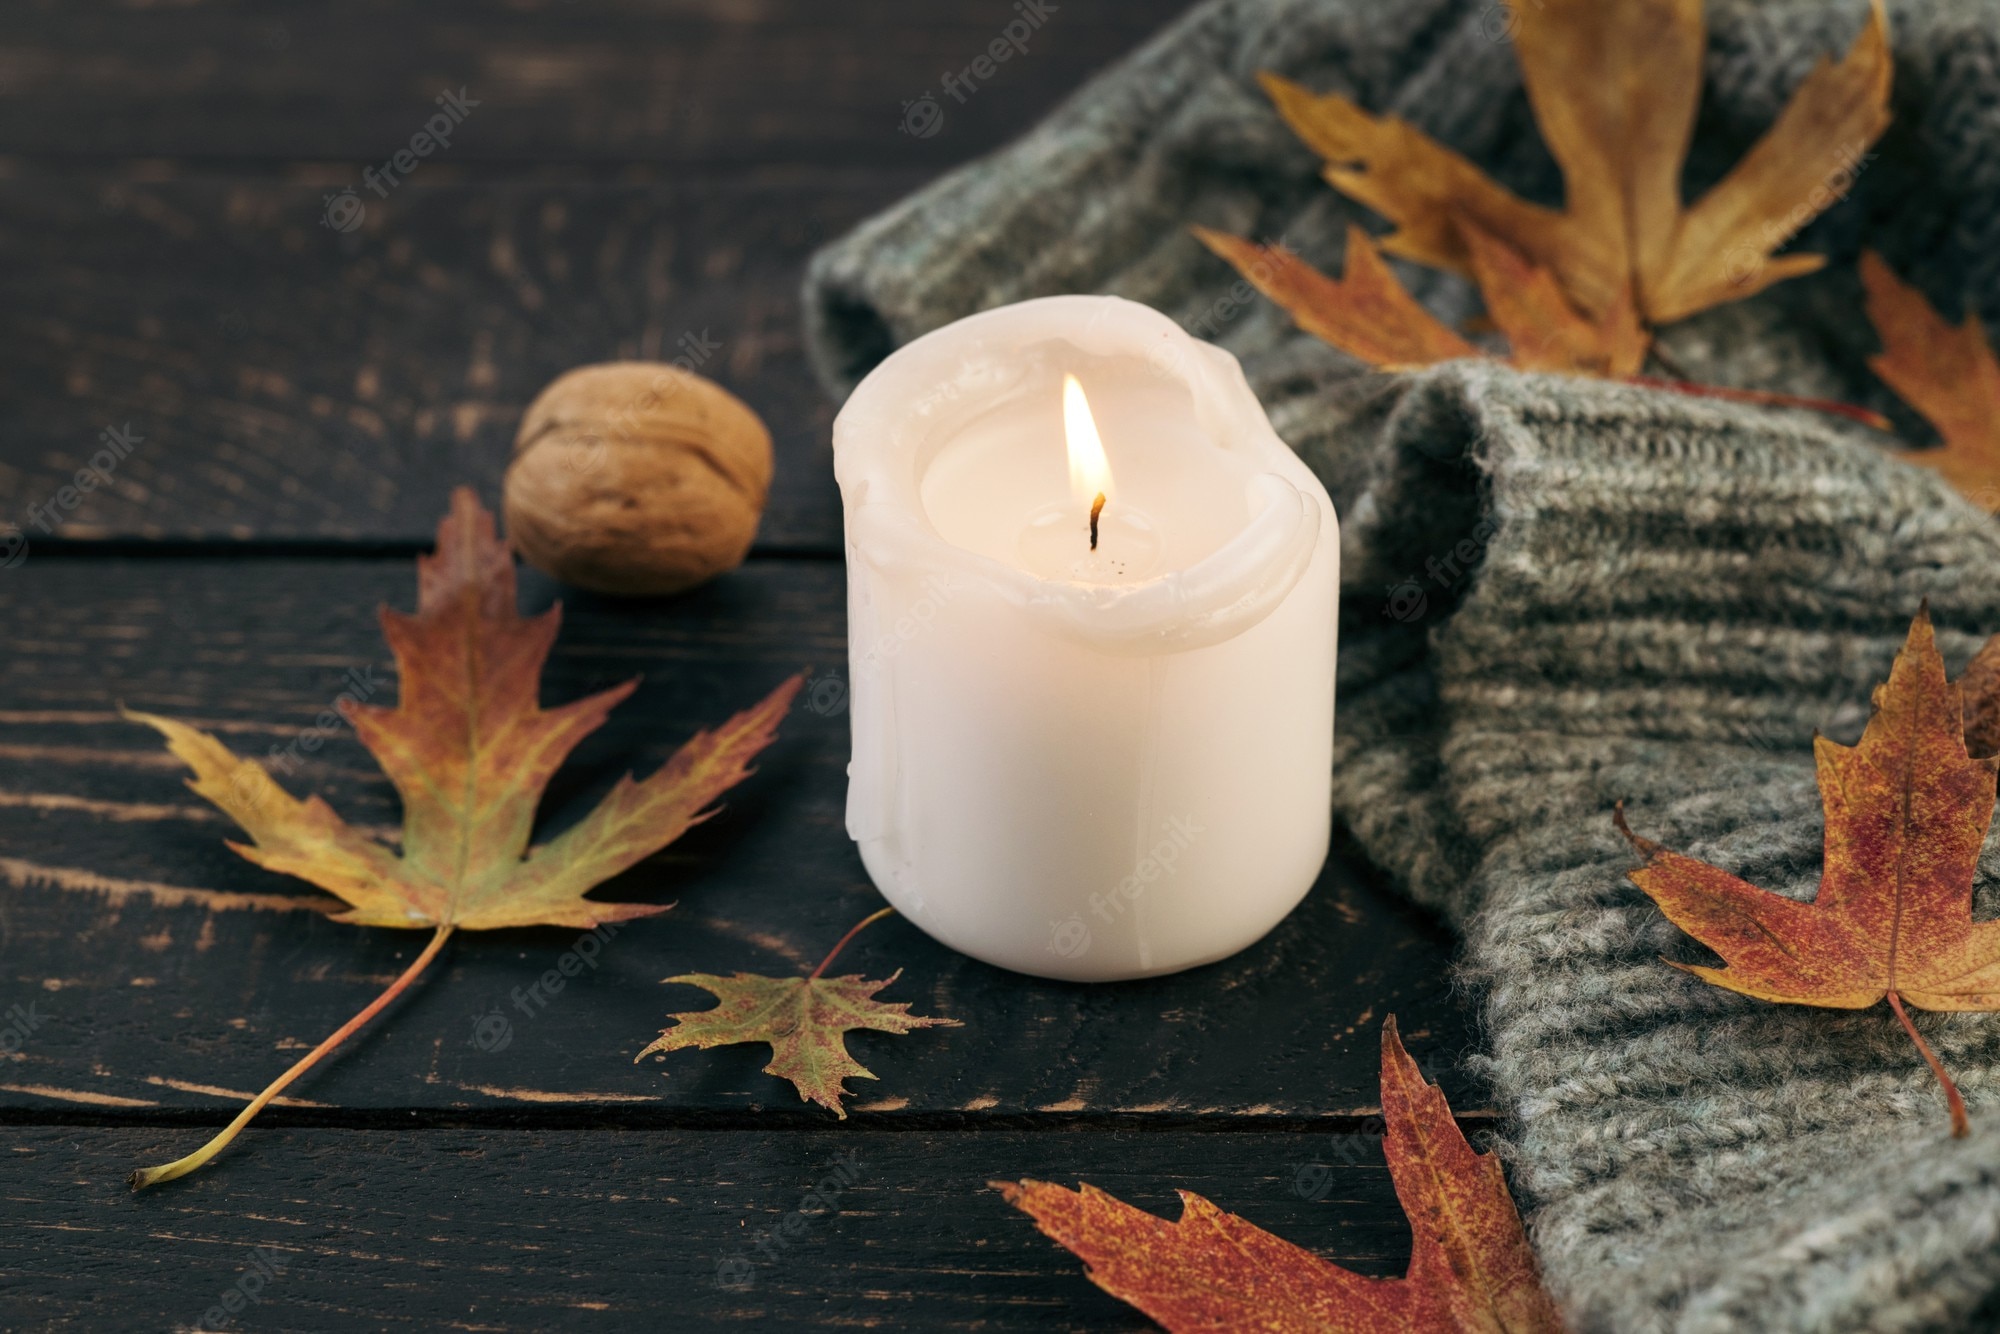 Premium Photo. Cozy and autumnal atmosphere. a candle is burning against the background of a knitted blanket with fallen autumn leaves on a dark wooden table